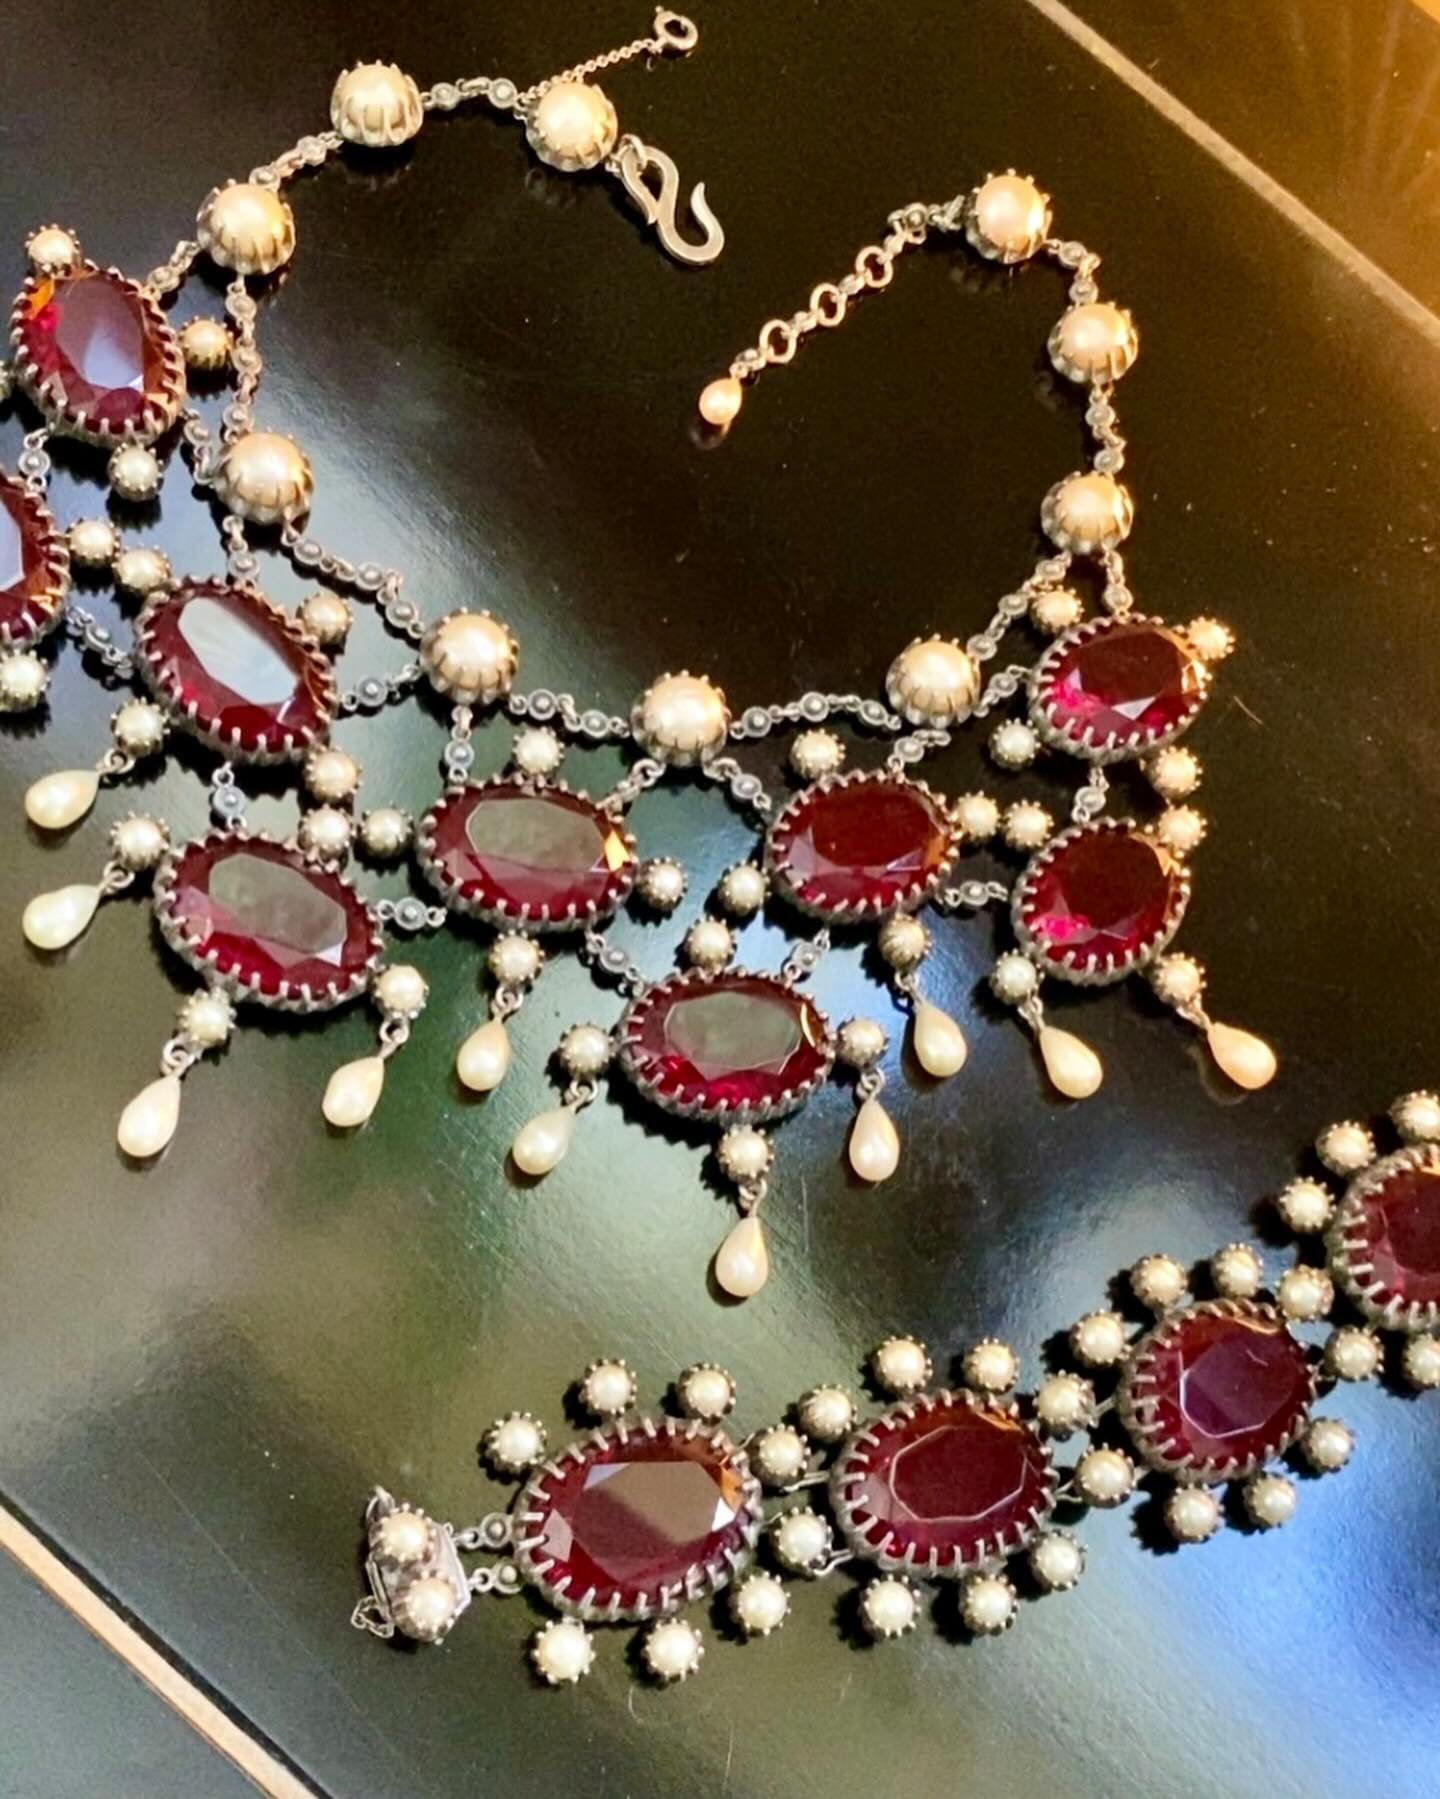 Lovely CHRISTIAN DIOR SET by FRANCIS WINTER 1955 . He m showing the book picture and reference as there two slightly different designs for this bib necklace . Stunning piece in lovely condition for its age . #christiandiorcouture #dior1955 
#frenchvi